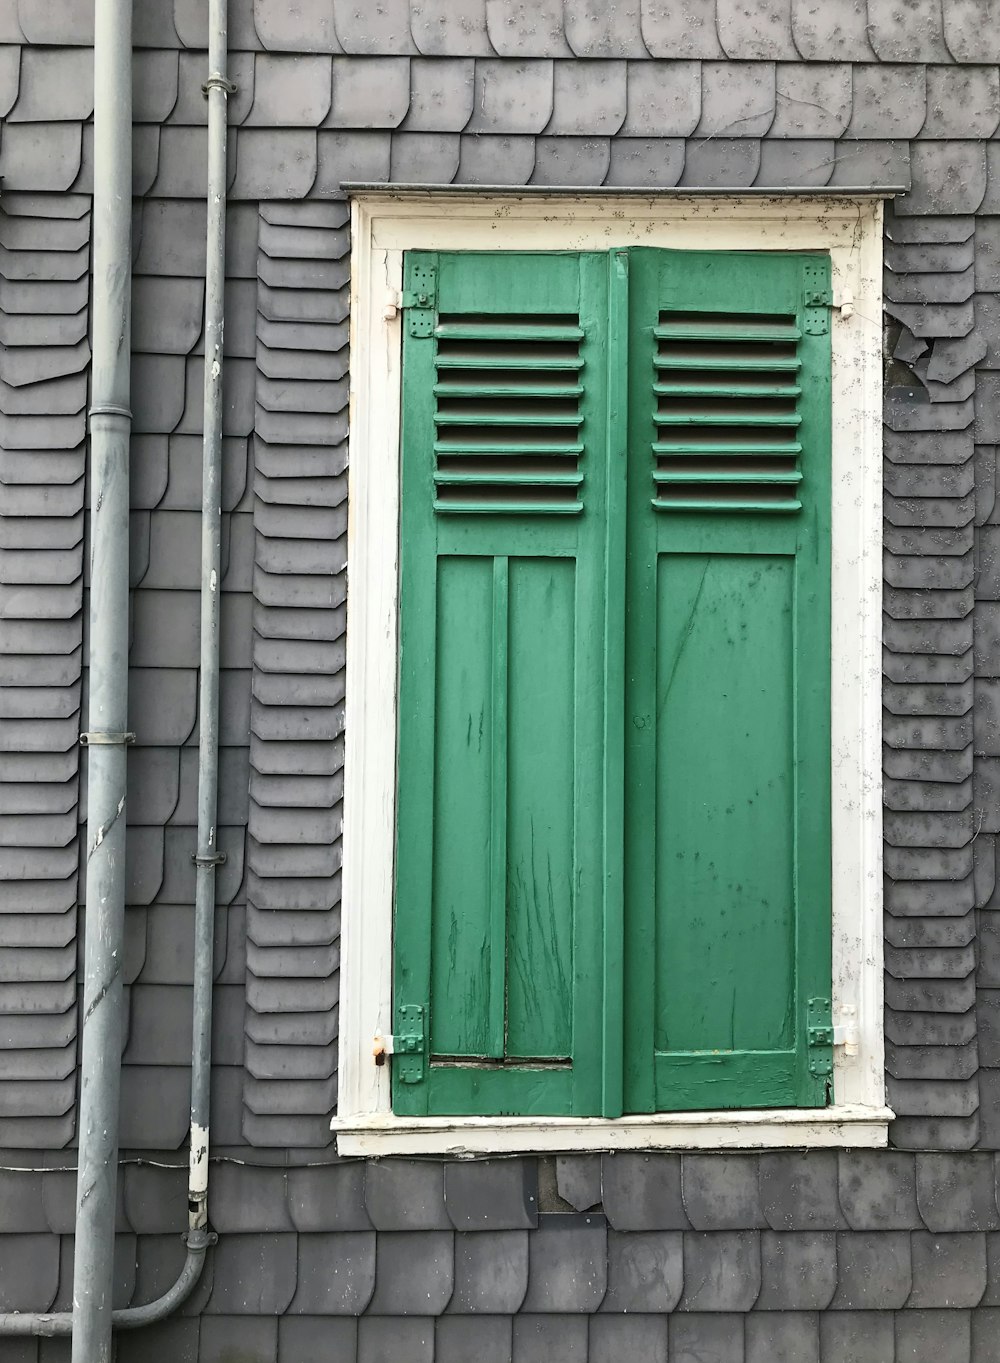 a green window on a brick building